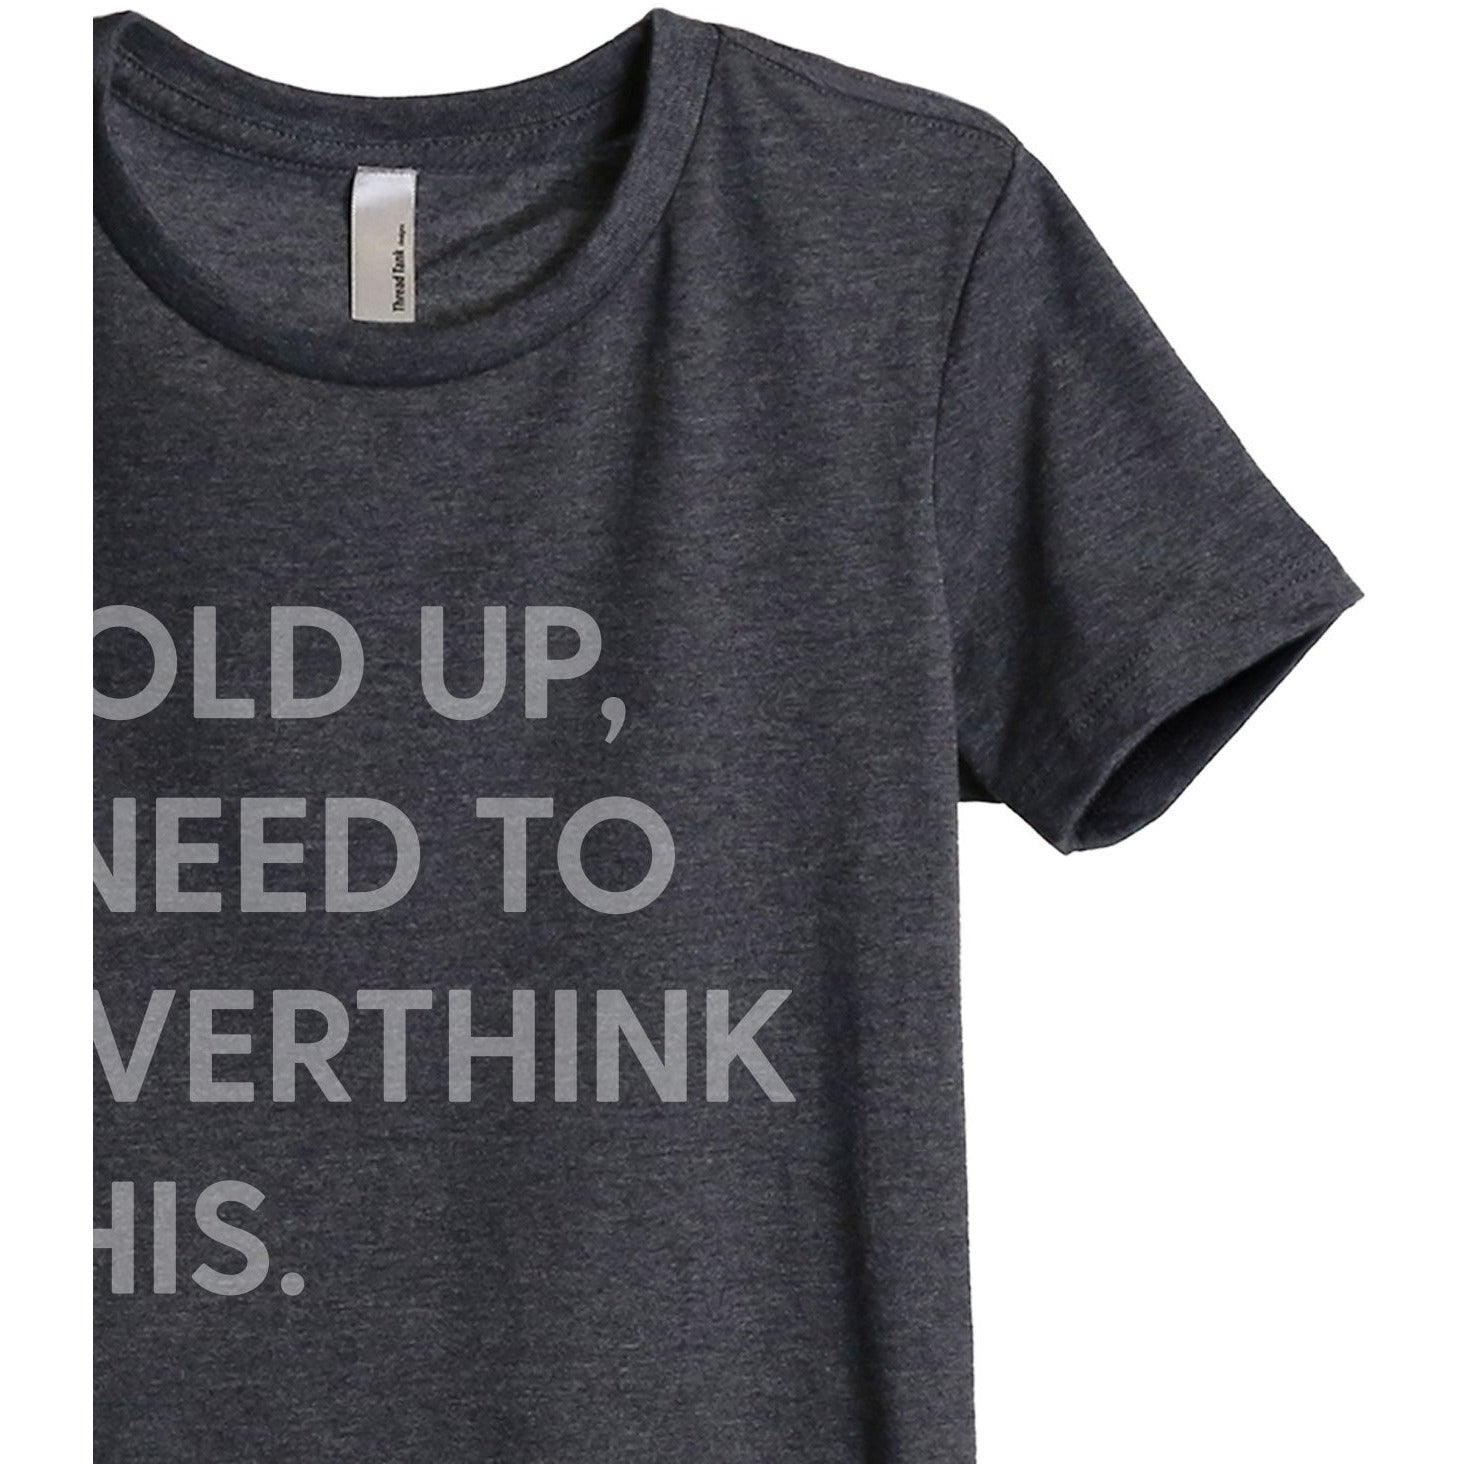 Hold Up, I Need To Rethink This Women's Relaxed Crewneck T-Shirt Top Tee Charcoal Grey
